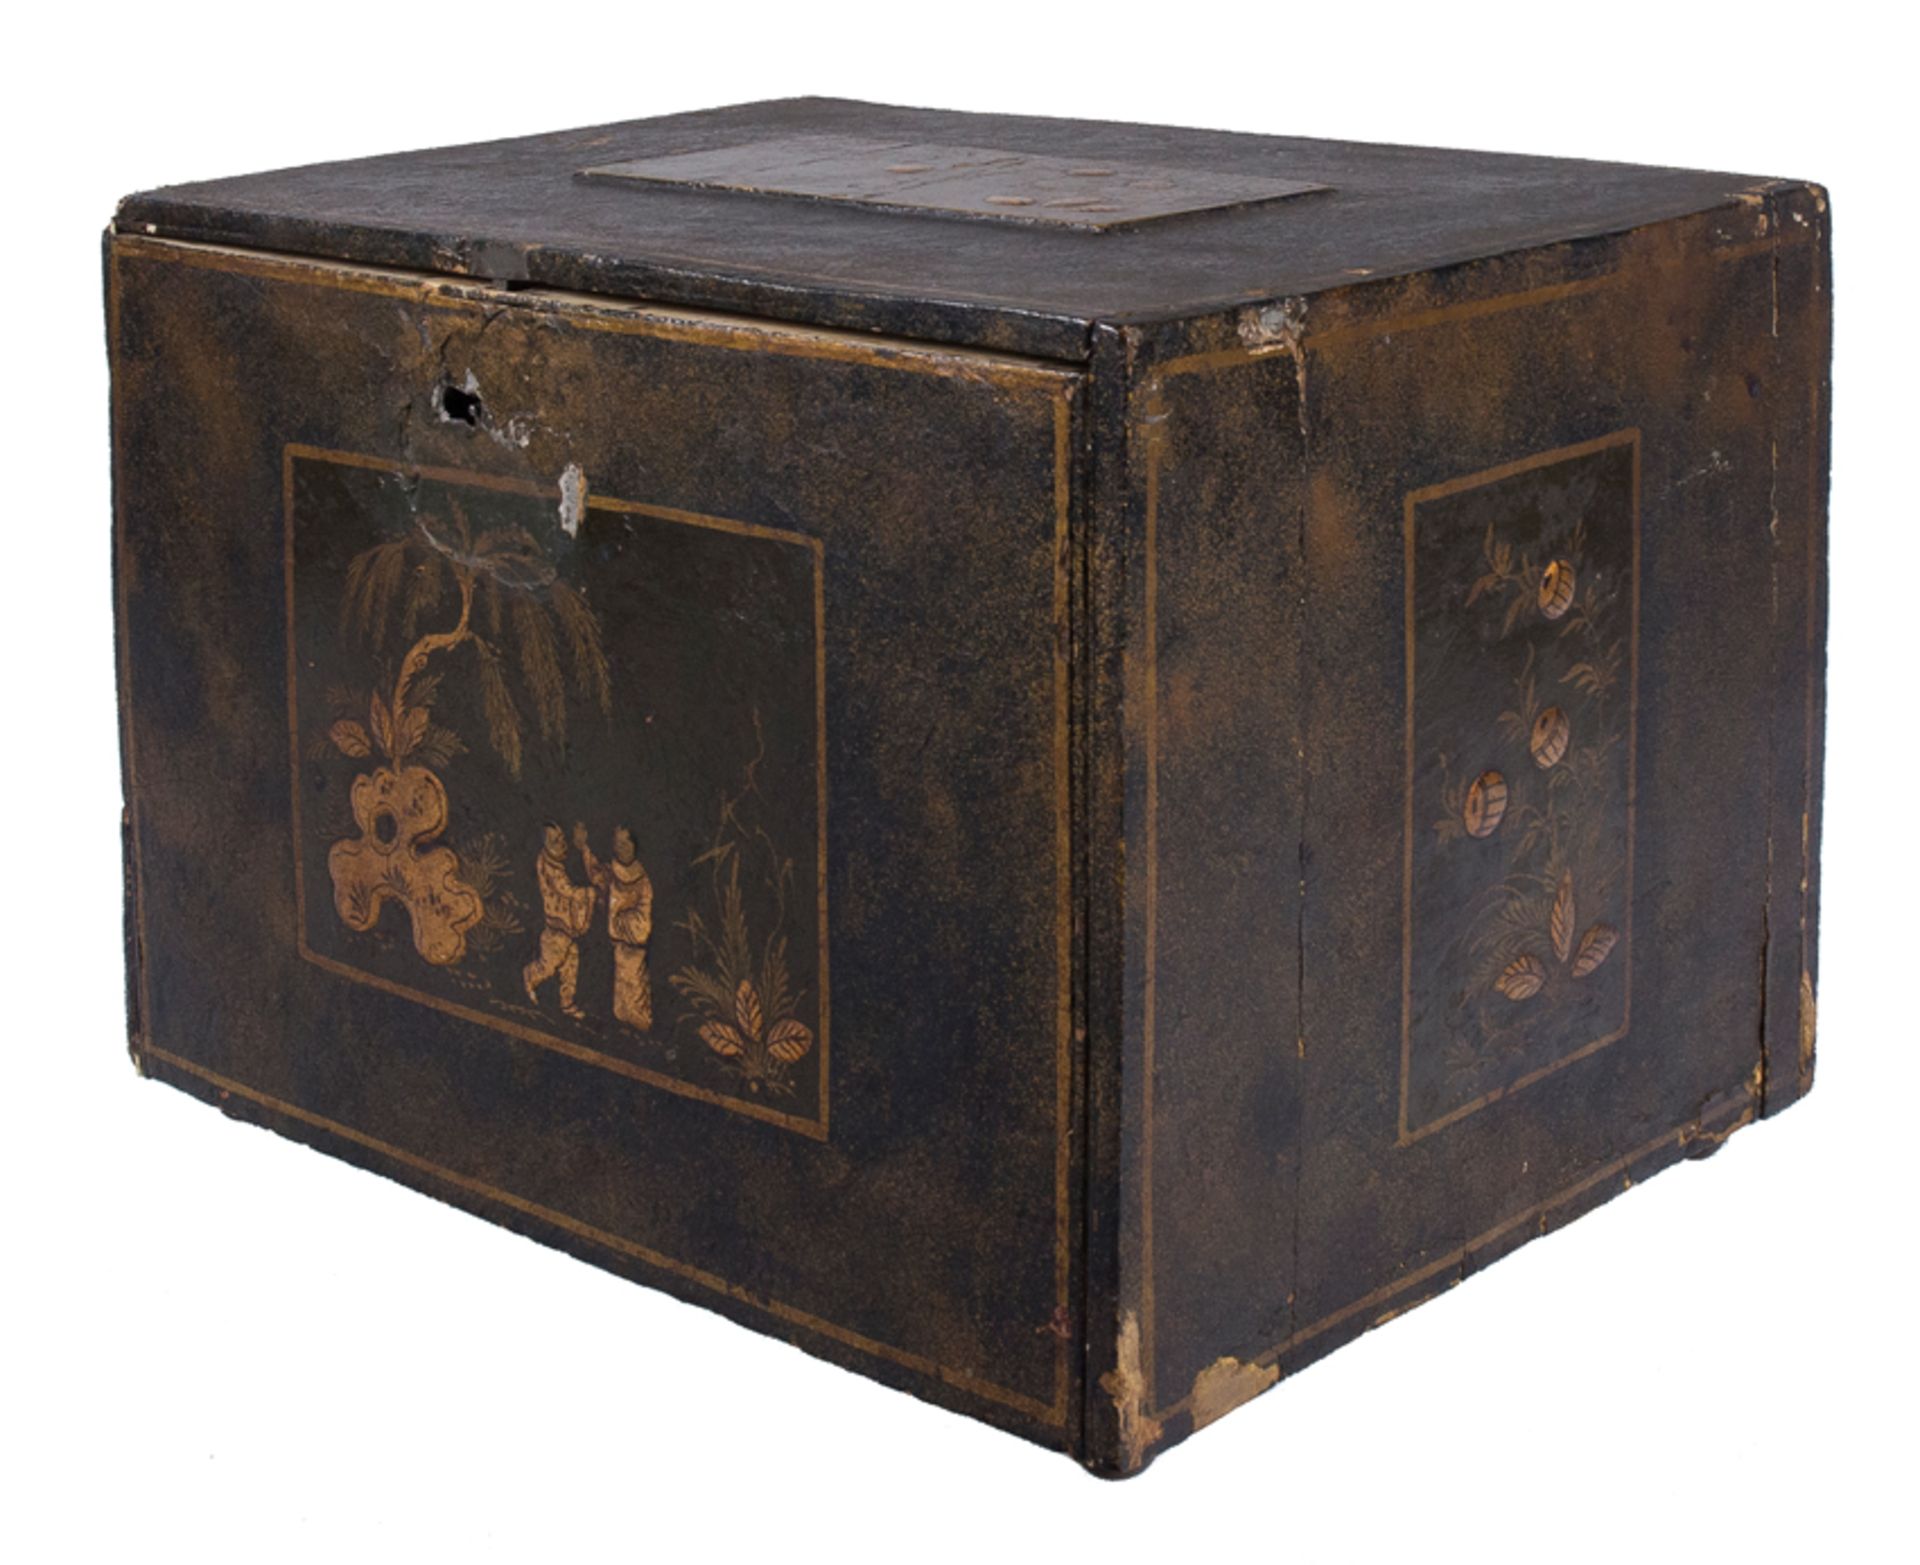 Gilded, lacquered wooden chest with engraved and gilded ivory interior. Indo-Portuguese. 18th centur - Image 6 of 10